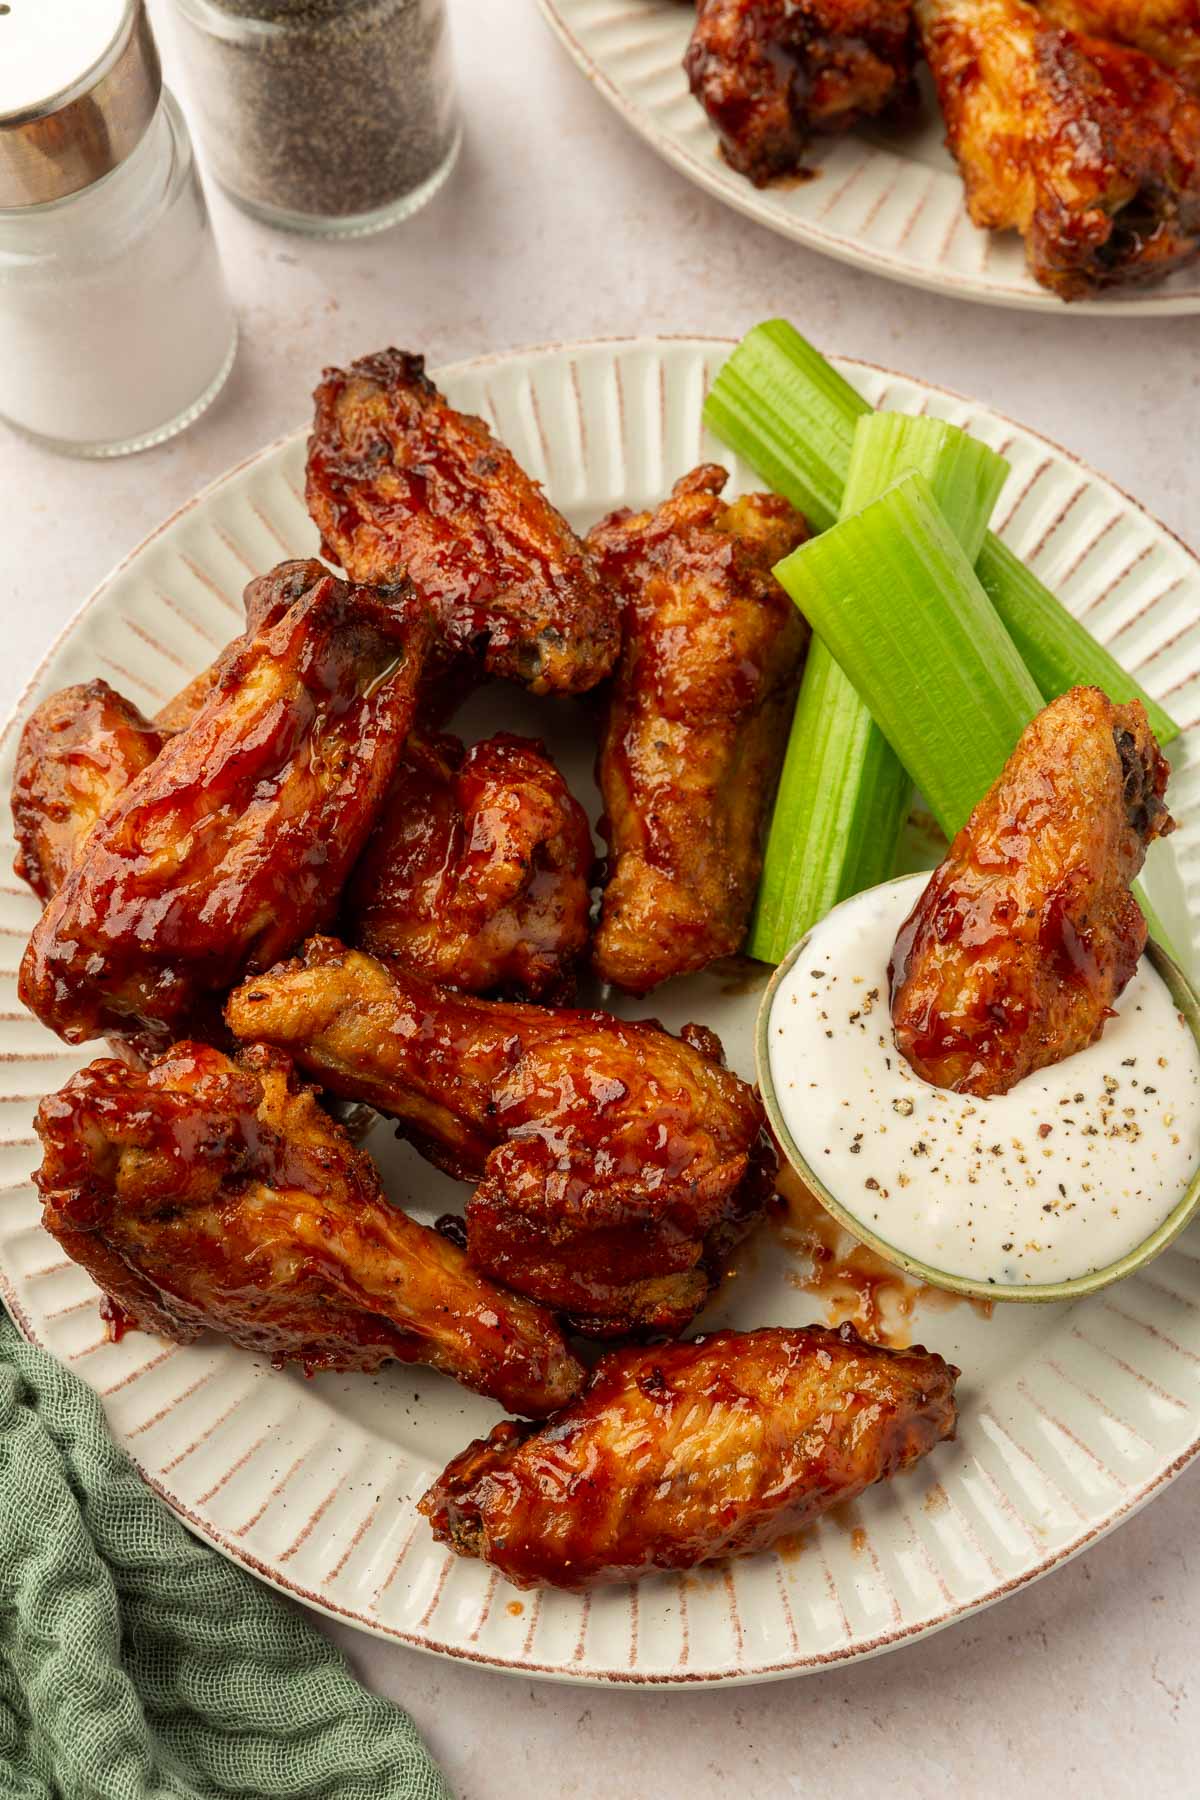 A heaping pile of BBQ chicken wings on a plate with a few pieces of celery and a small bowl of blue cheese dressing with salt and pepper shakers on the side.